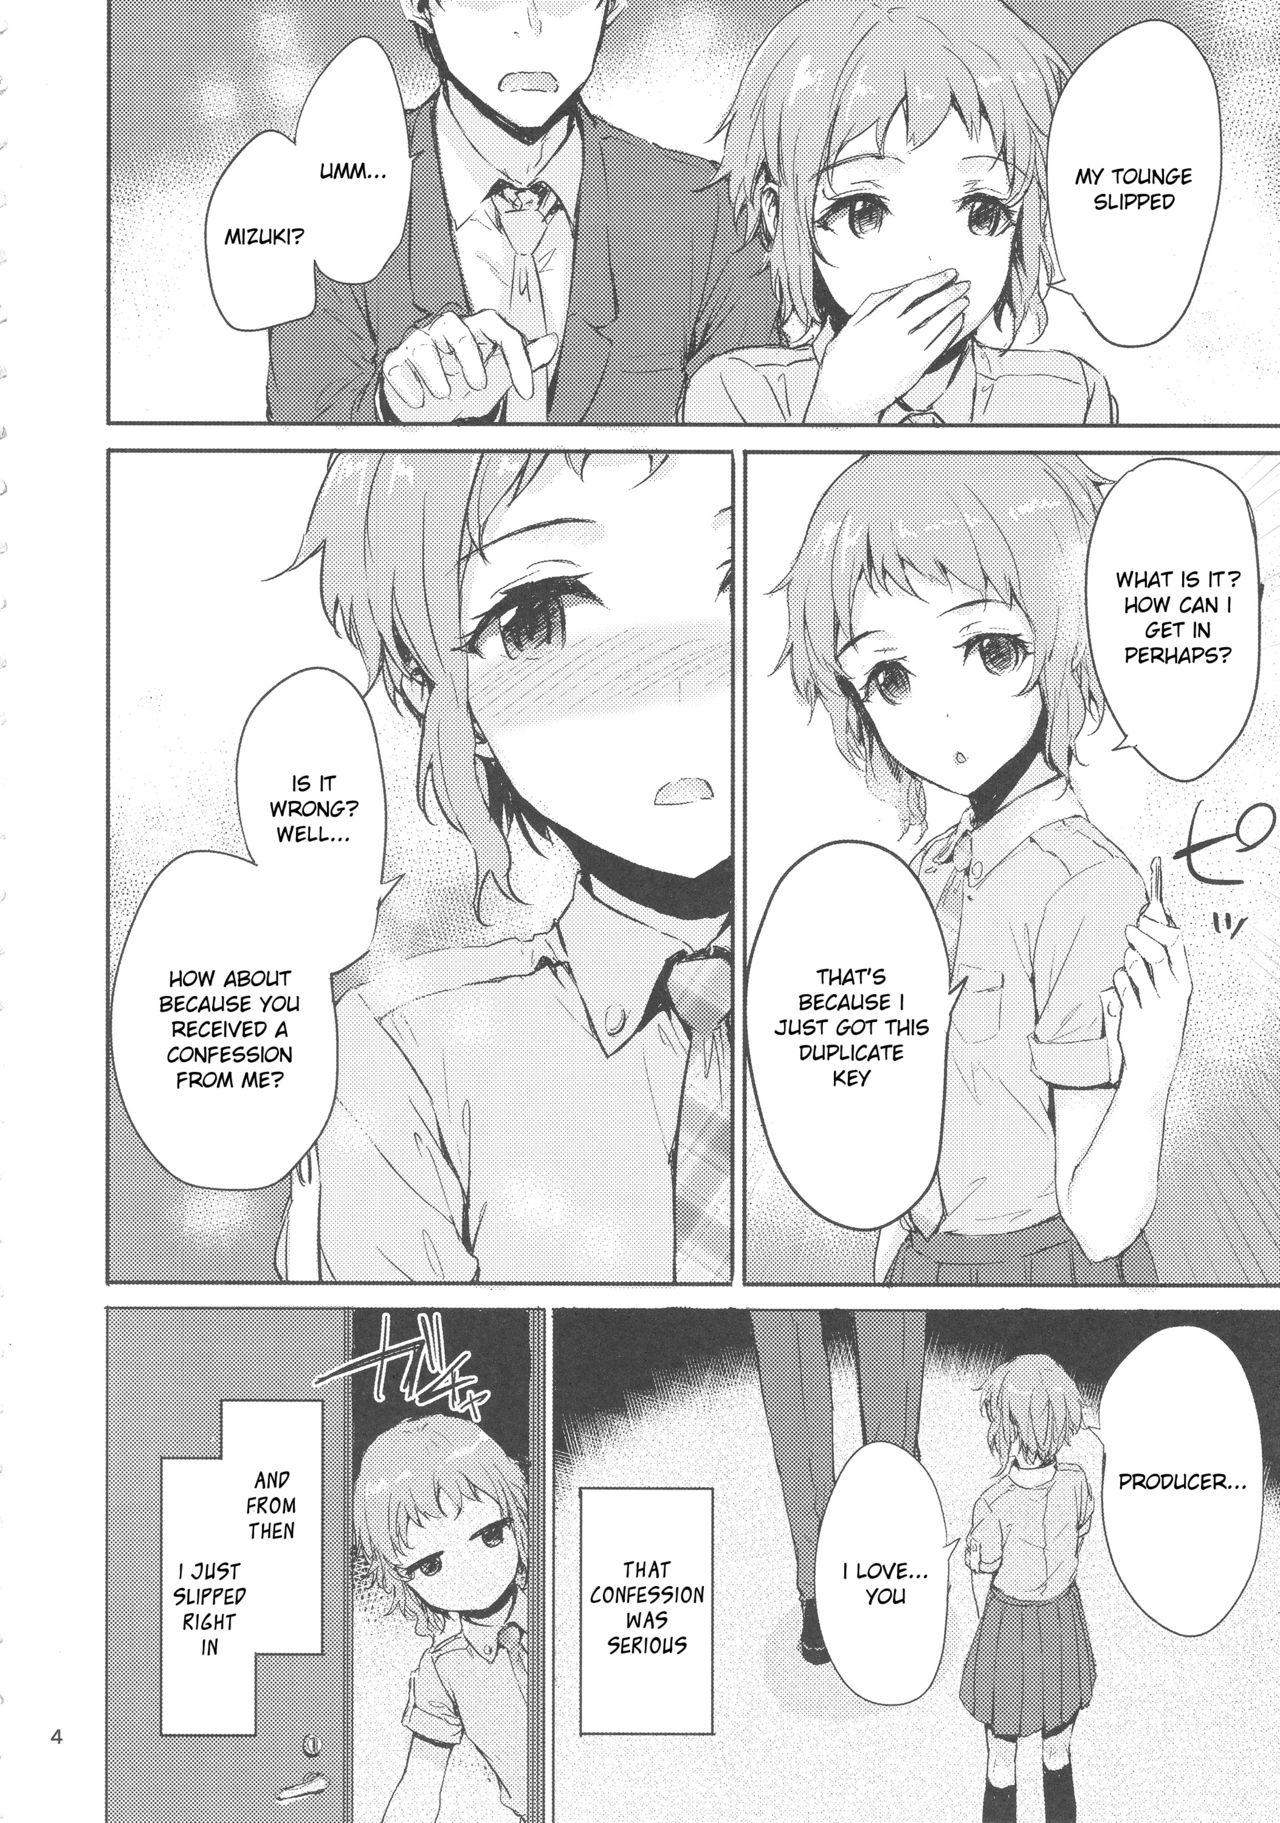 Newbie LOVE LOVE PORKERFACE - The idolmaster Sologirl - Page 5